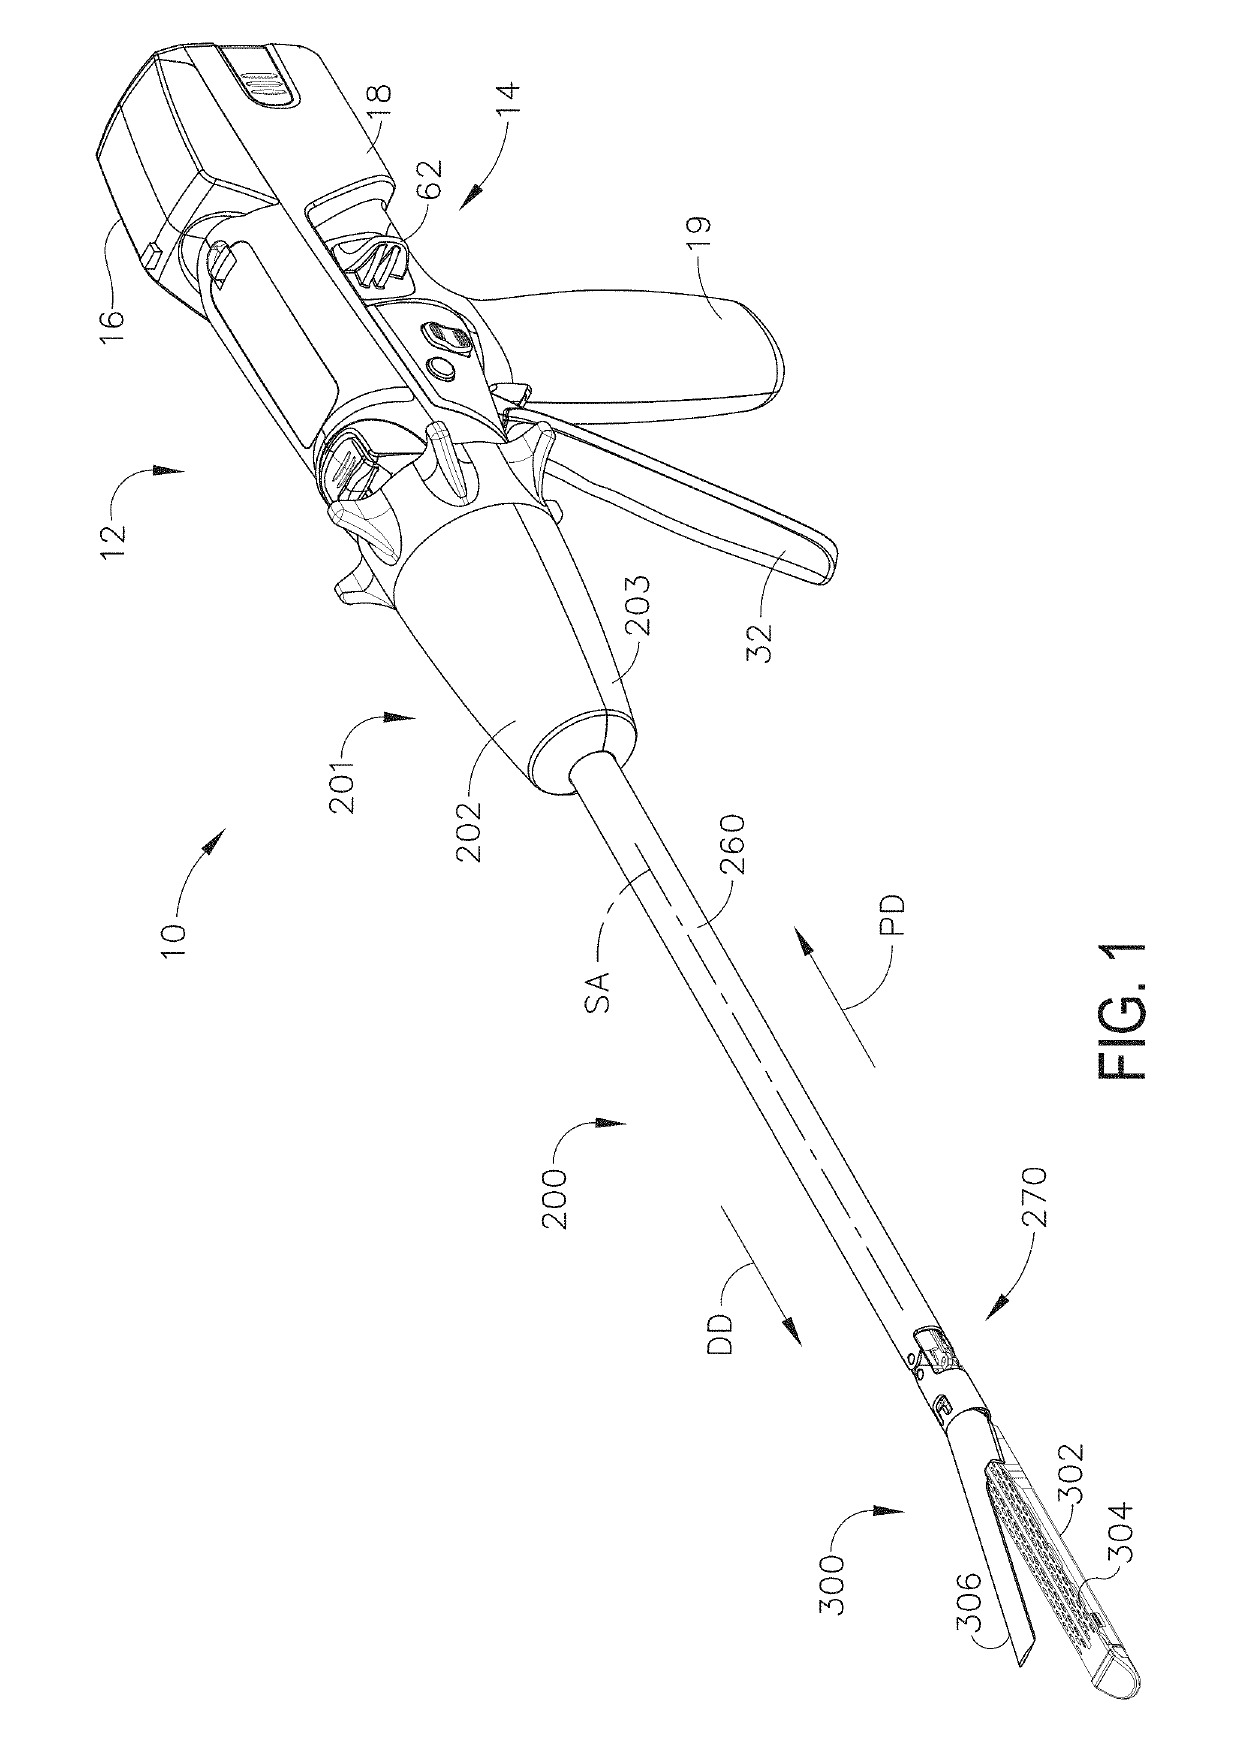 Surgical instrument with detection sensors